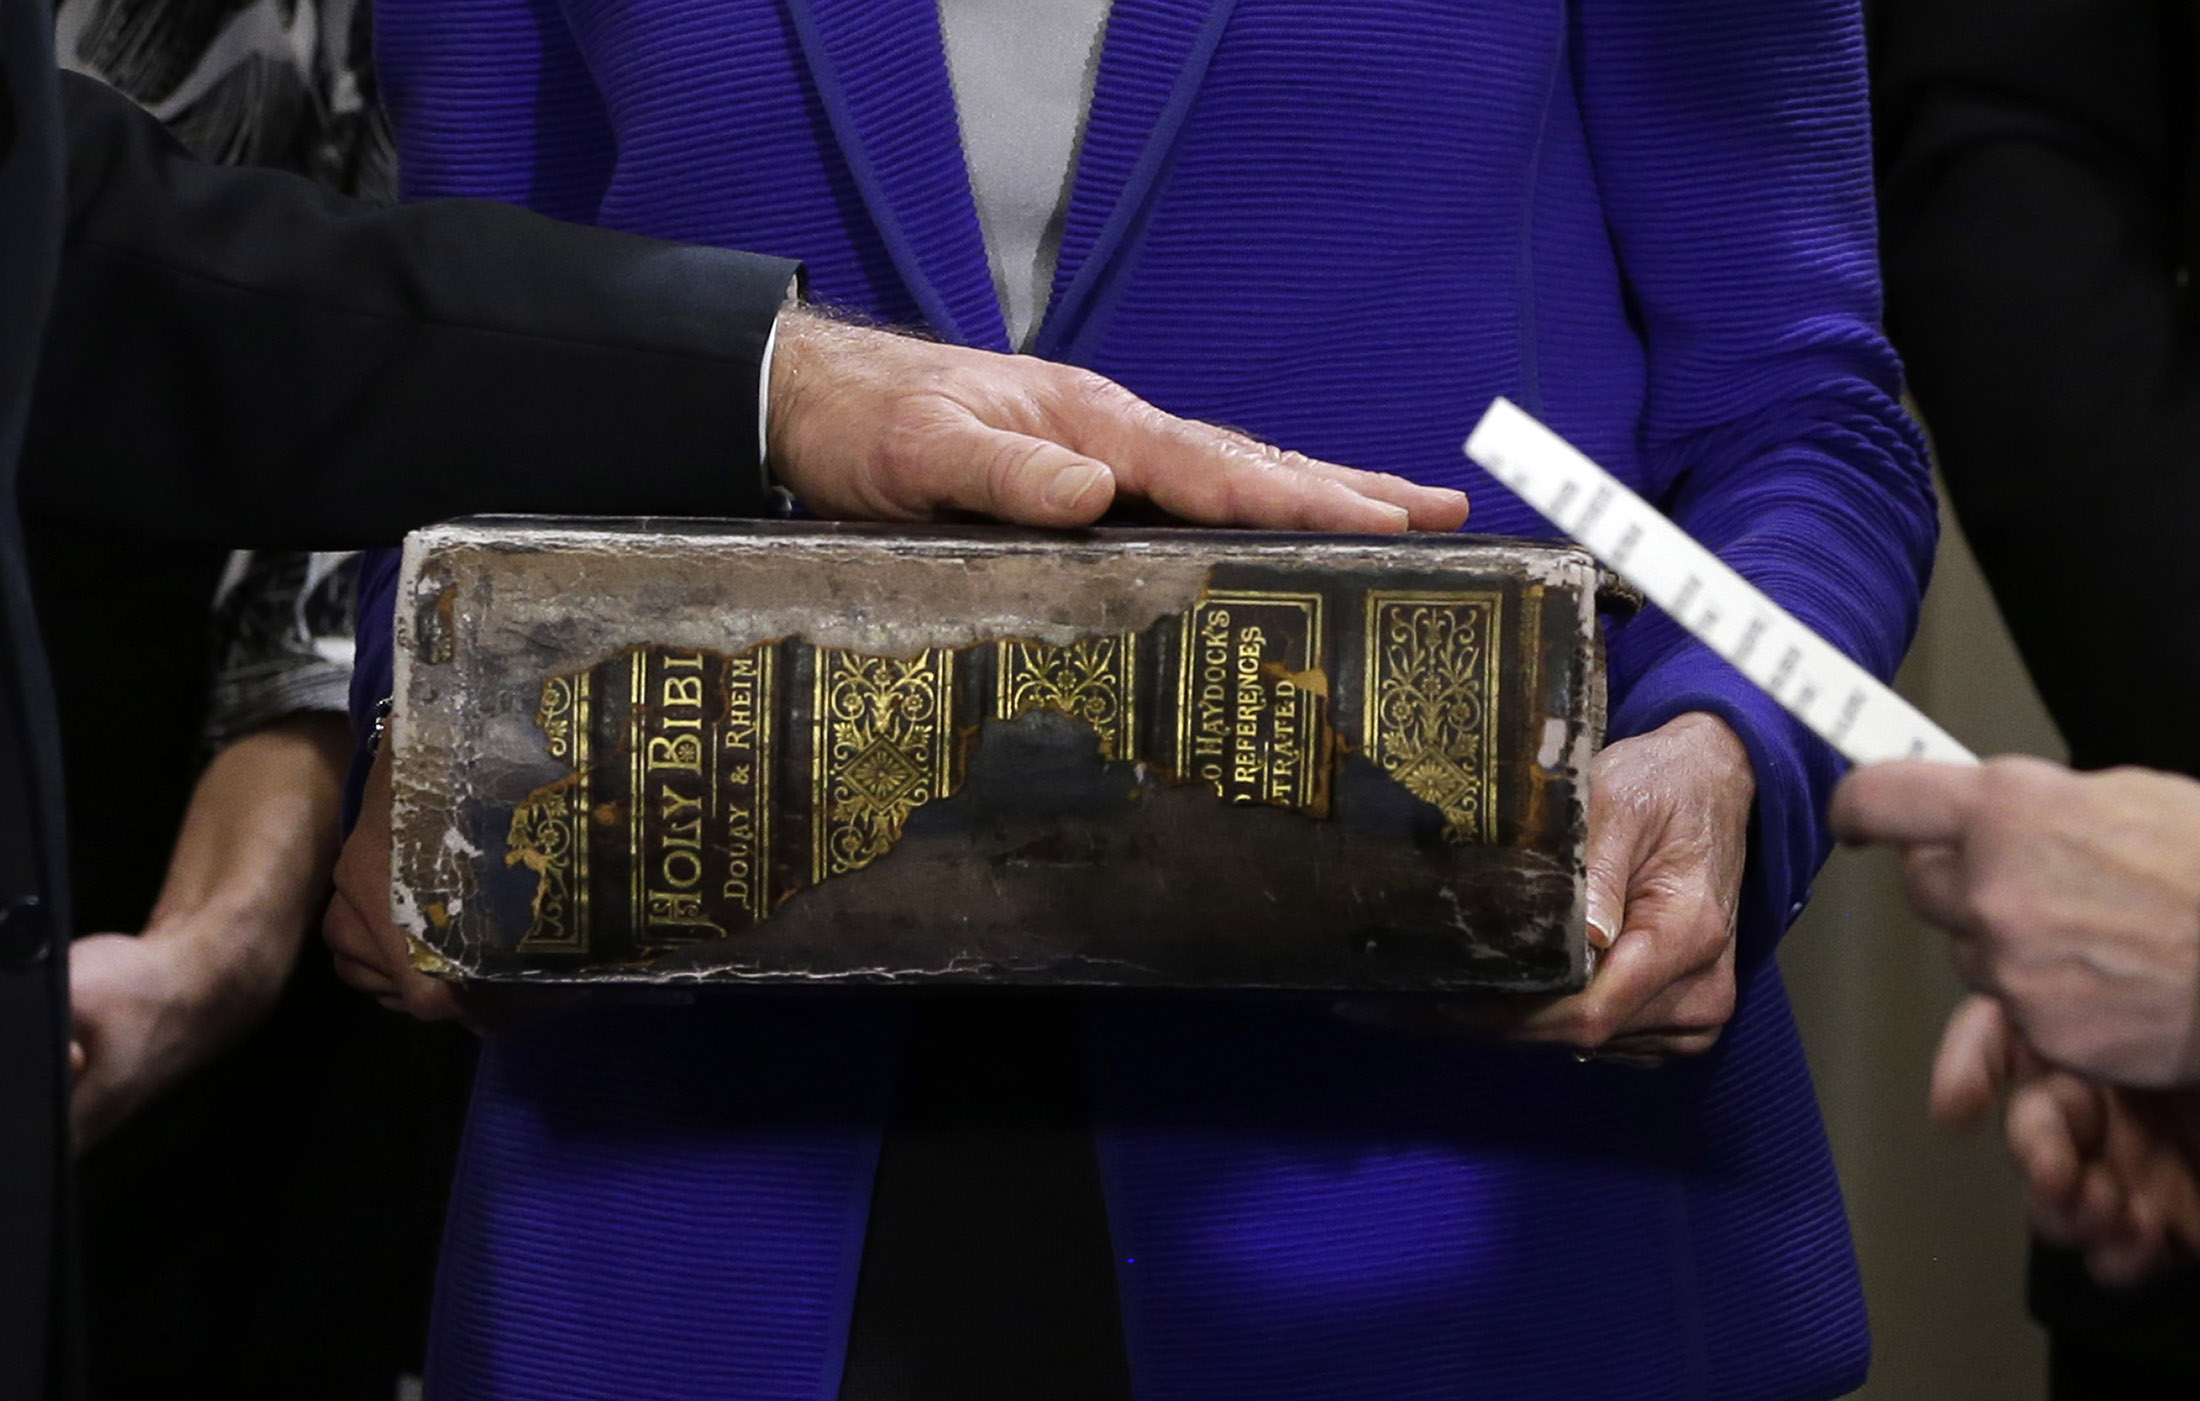 PHOTO: U.S. Vice President Joe Biden places his hand on the Biden Family Bible as he takes the oath of office during his official swearing-in ceremony at the Naval Observatory on Jan. 20, 2013 in Washington, DC.